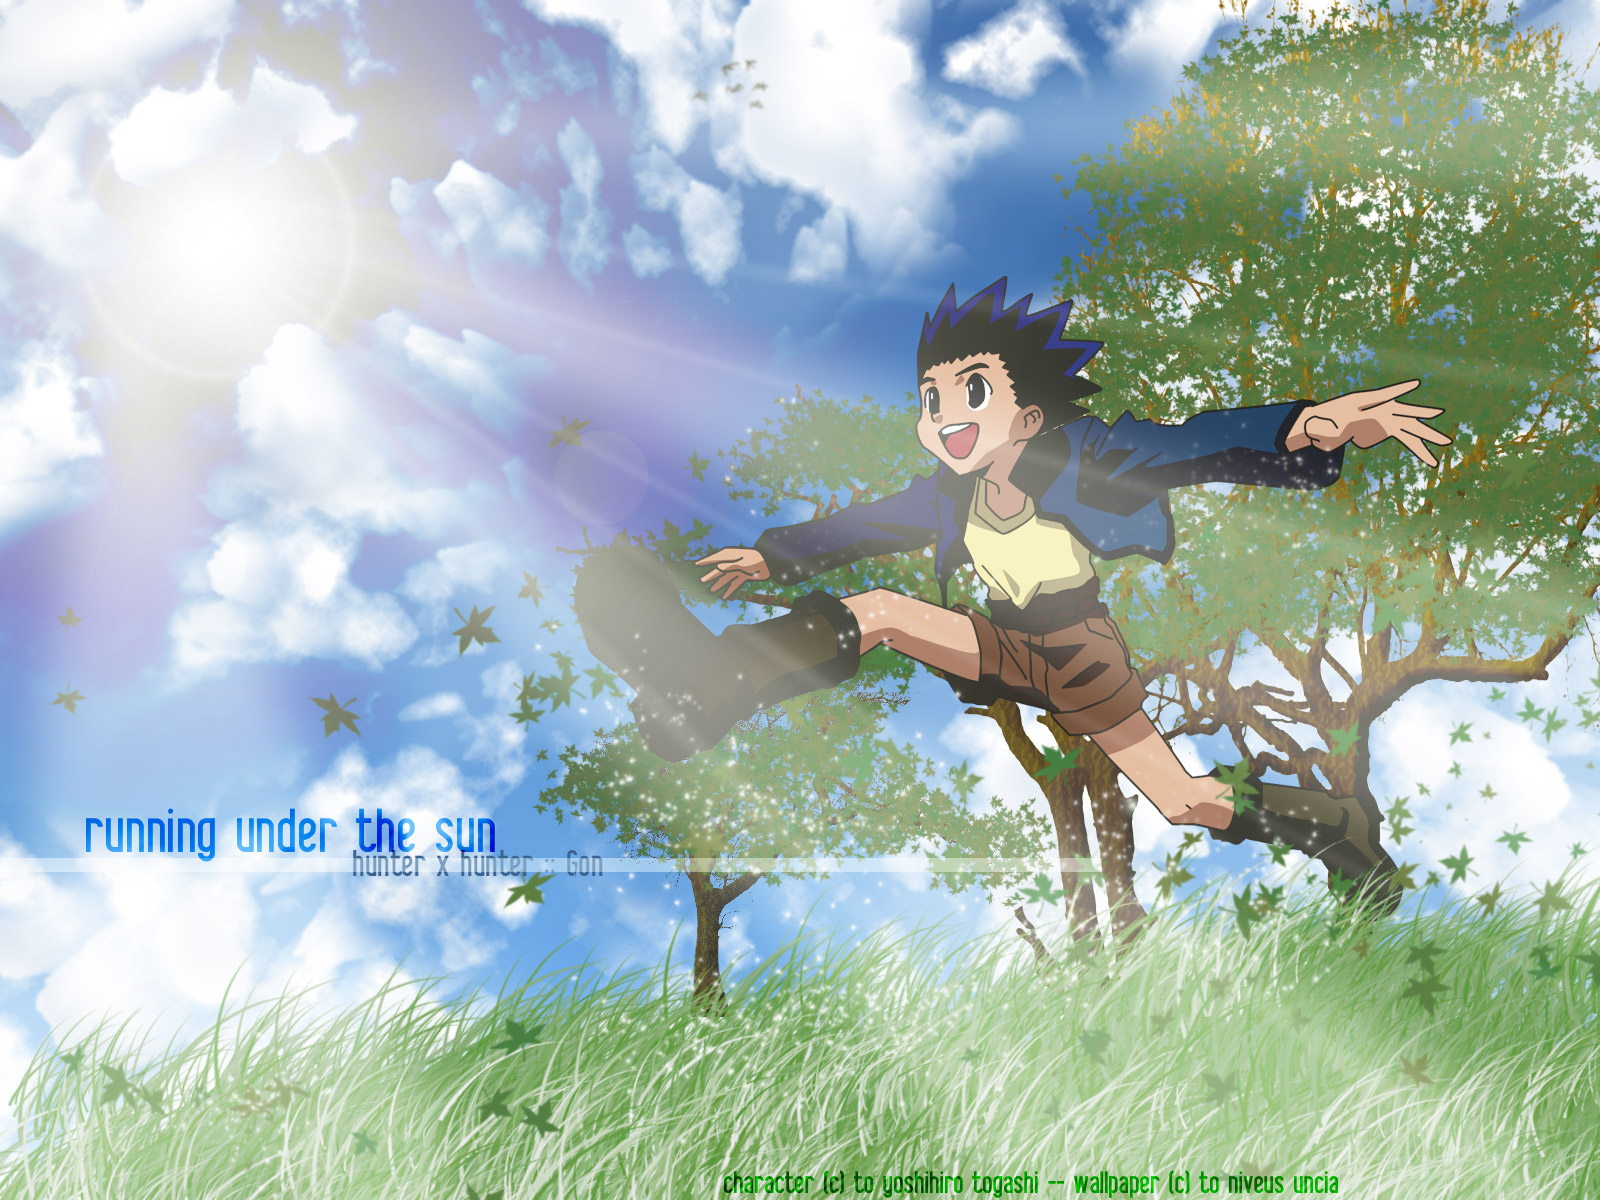 Gon Freecss from anime Hunter x Hunter, portrayed in a captivating desktop wallpaper.